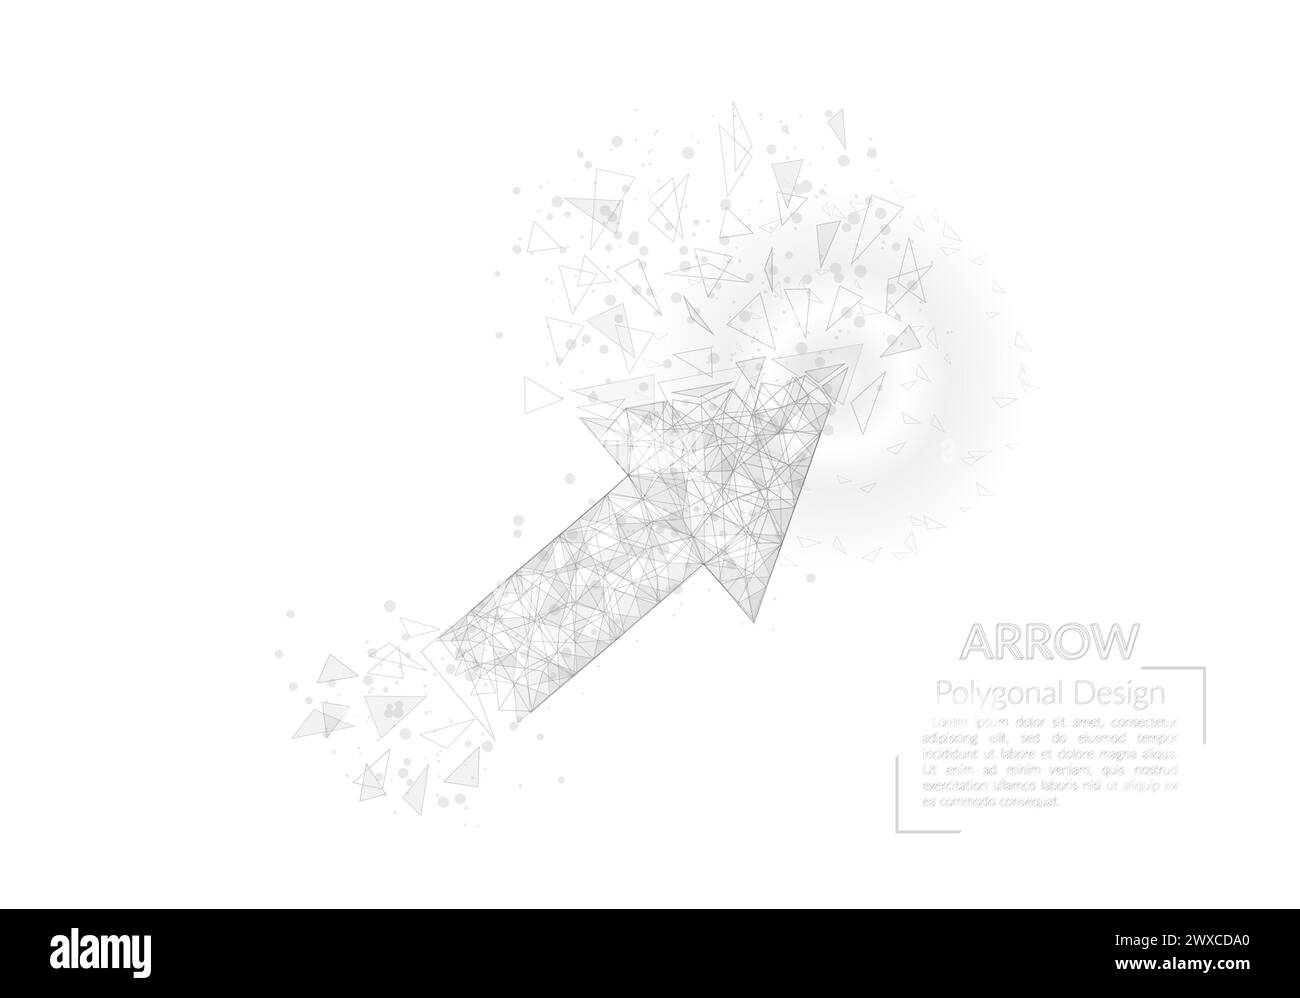 Abstract isolated image of arrow. Polygonal illustration looks like stars in the blask night sky in spase or flying glass shards. Digital design for Stock Vector